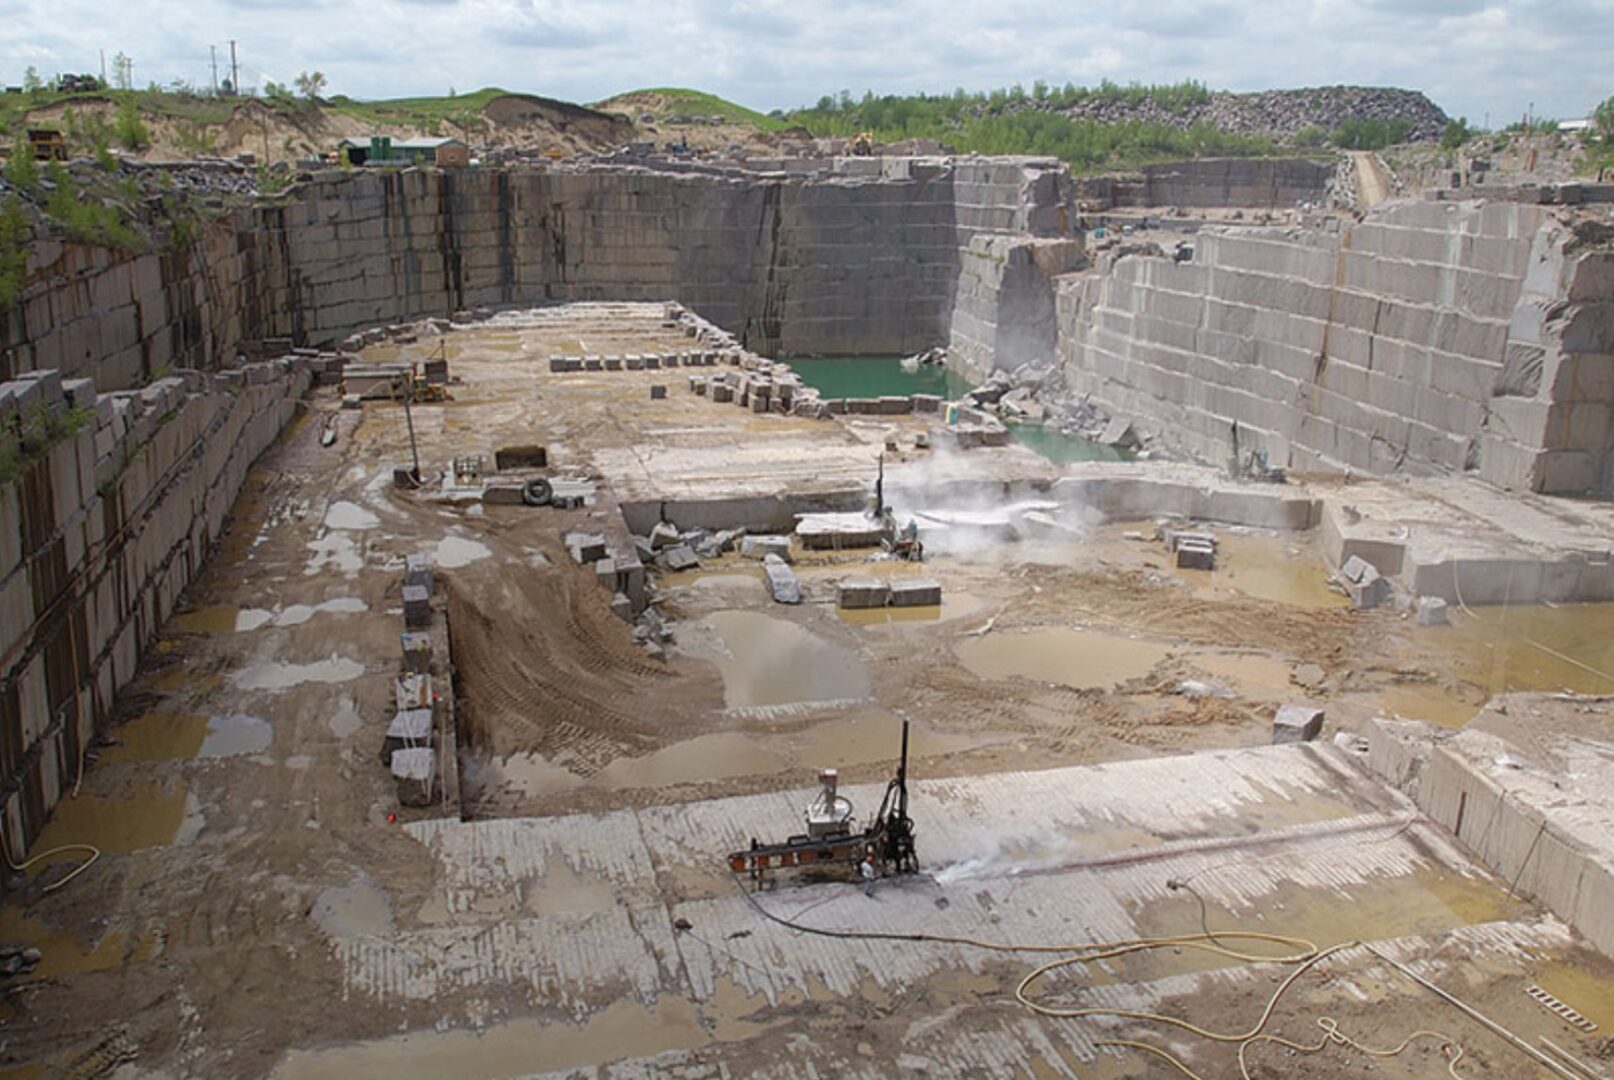 A large open pit with lots of rocks and dirt.